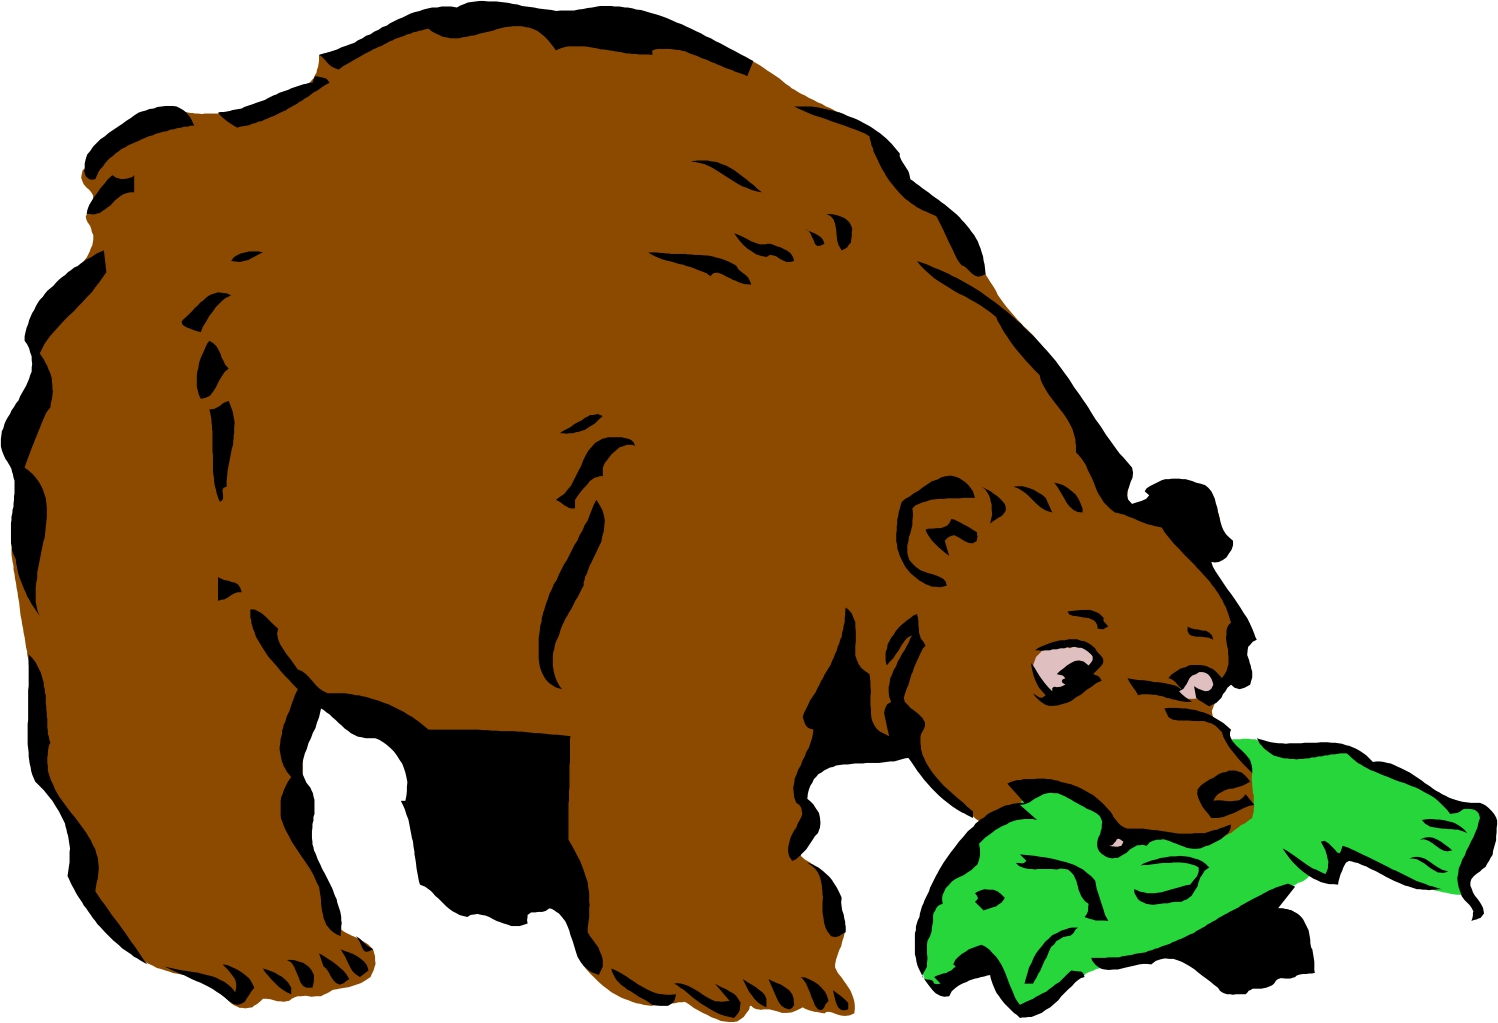 Standing bear clipart free clipart images 2 - Clipartix